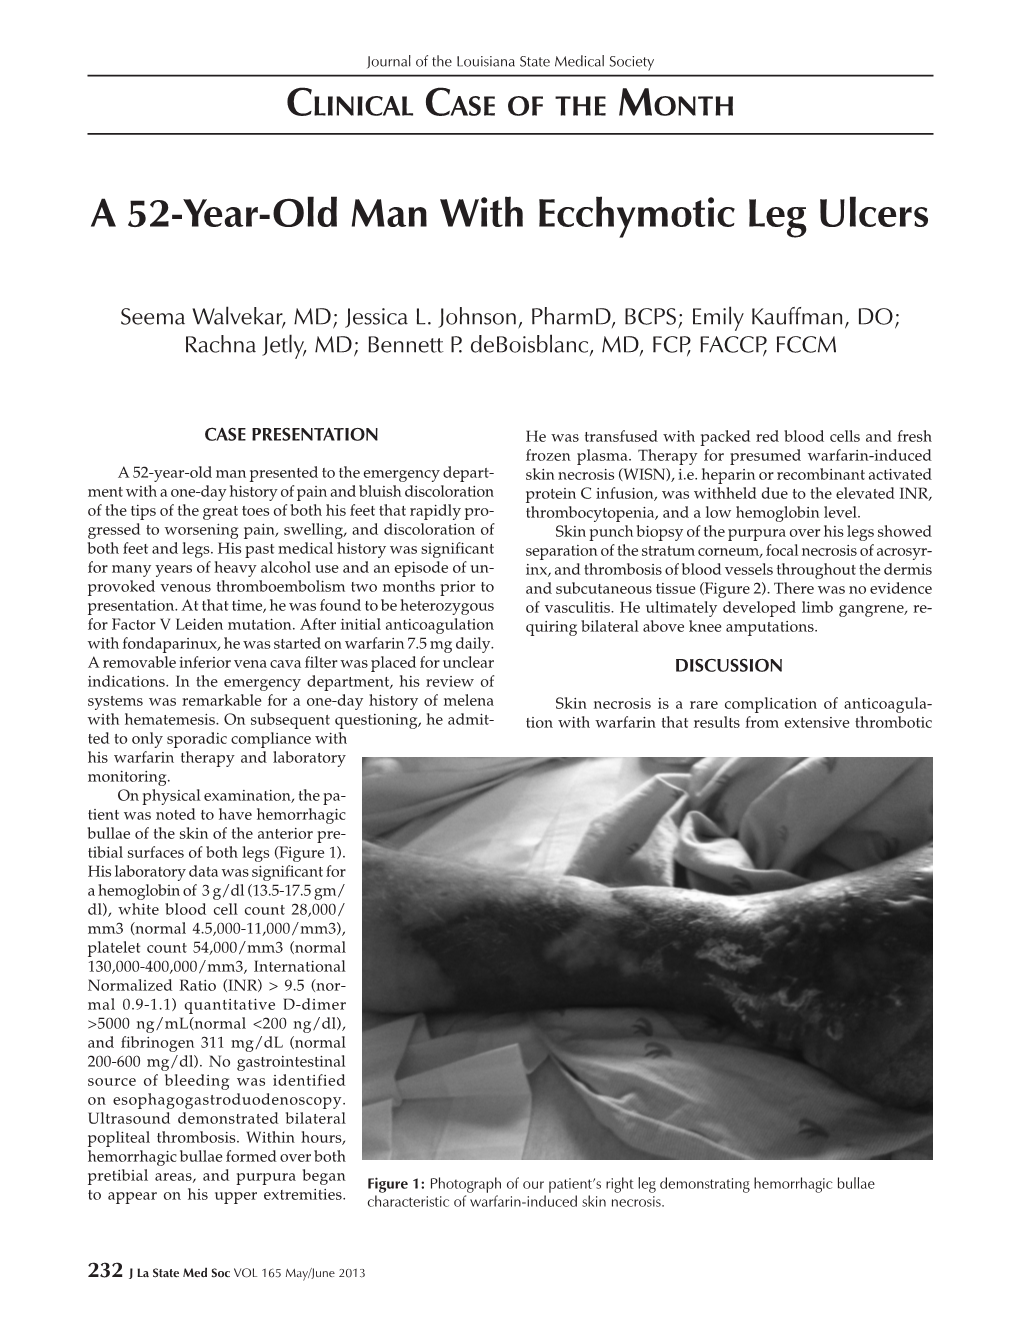 A 52-Year-Old Man with Ecchymotic Leg Ulcers